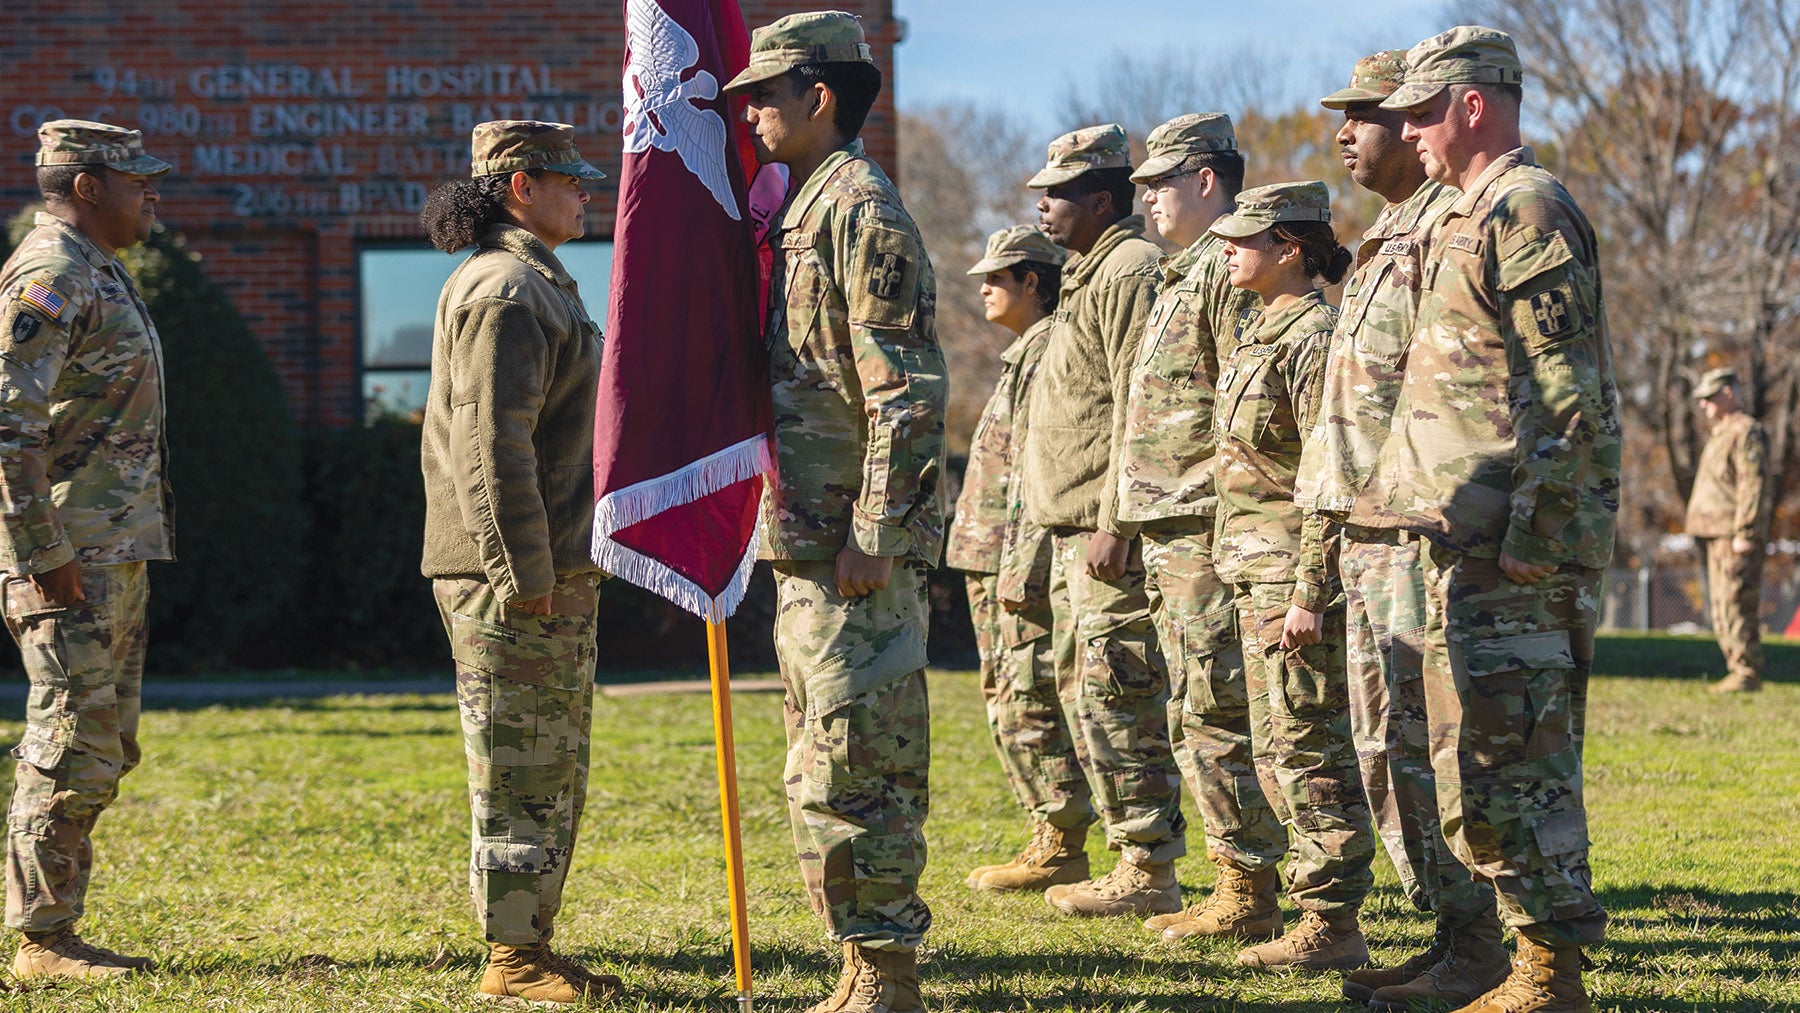 U.S. Army Reserve soldiers with the 394th Field Hospital are promoted to sergeant during a monthly battle assembly in Seagoville, Texas. (Credit: U.S. Army Reserve/1st Lt. Harrison Gold)